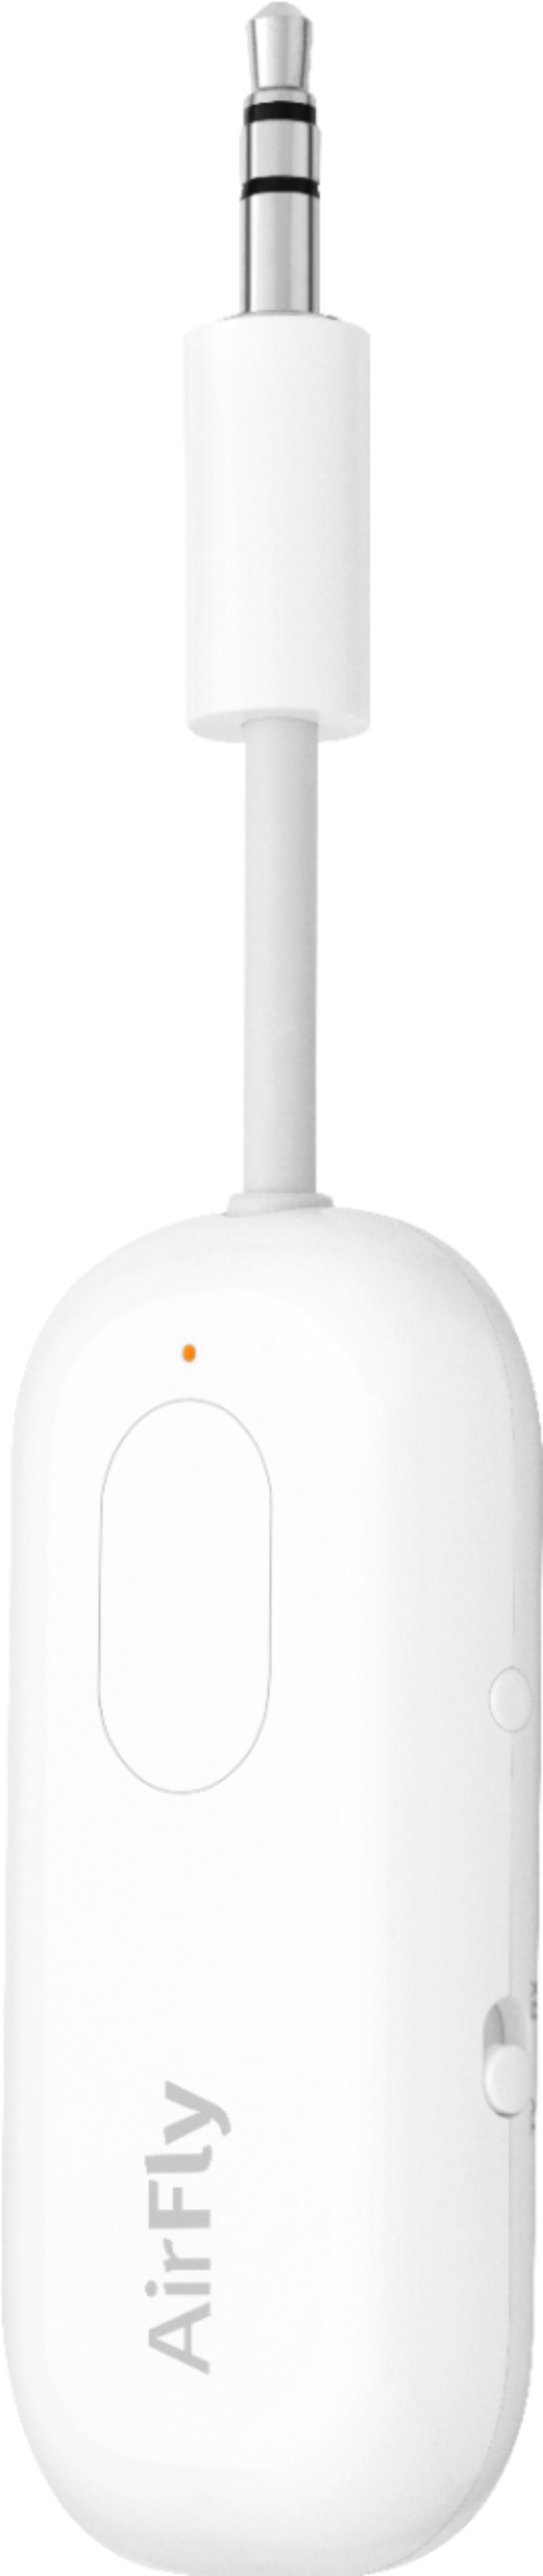 Left View: Linksys - Wi-Fi Access Point